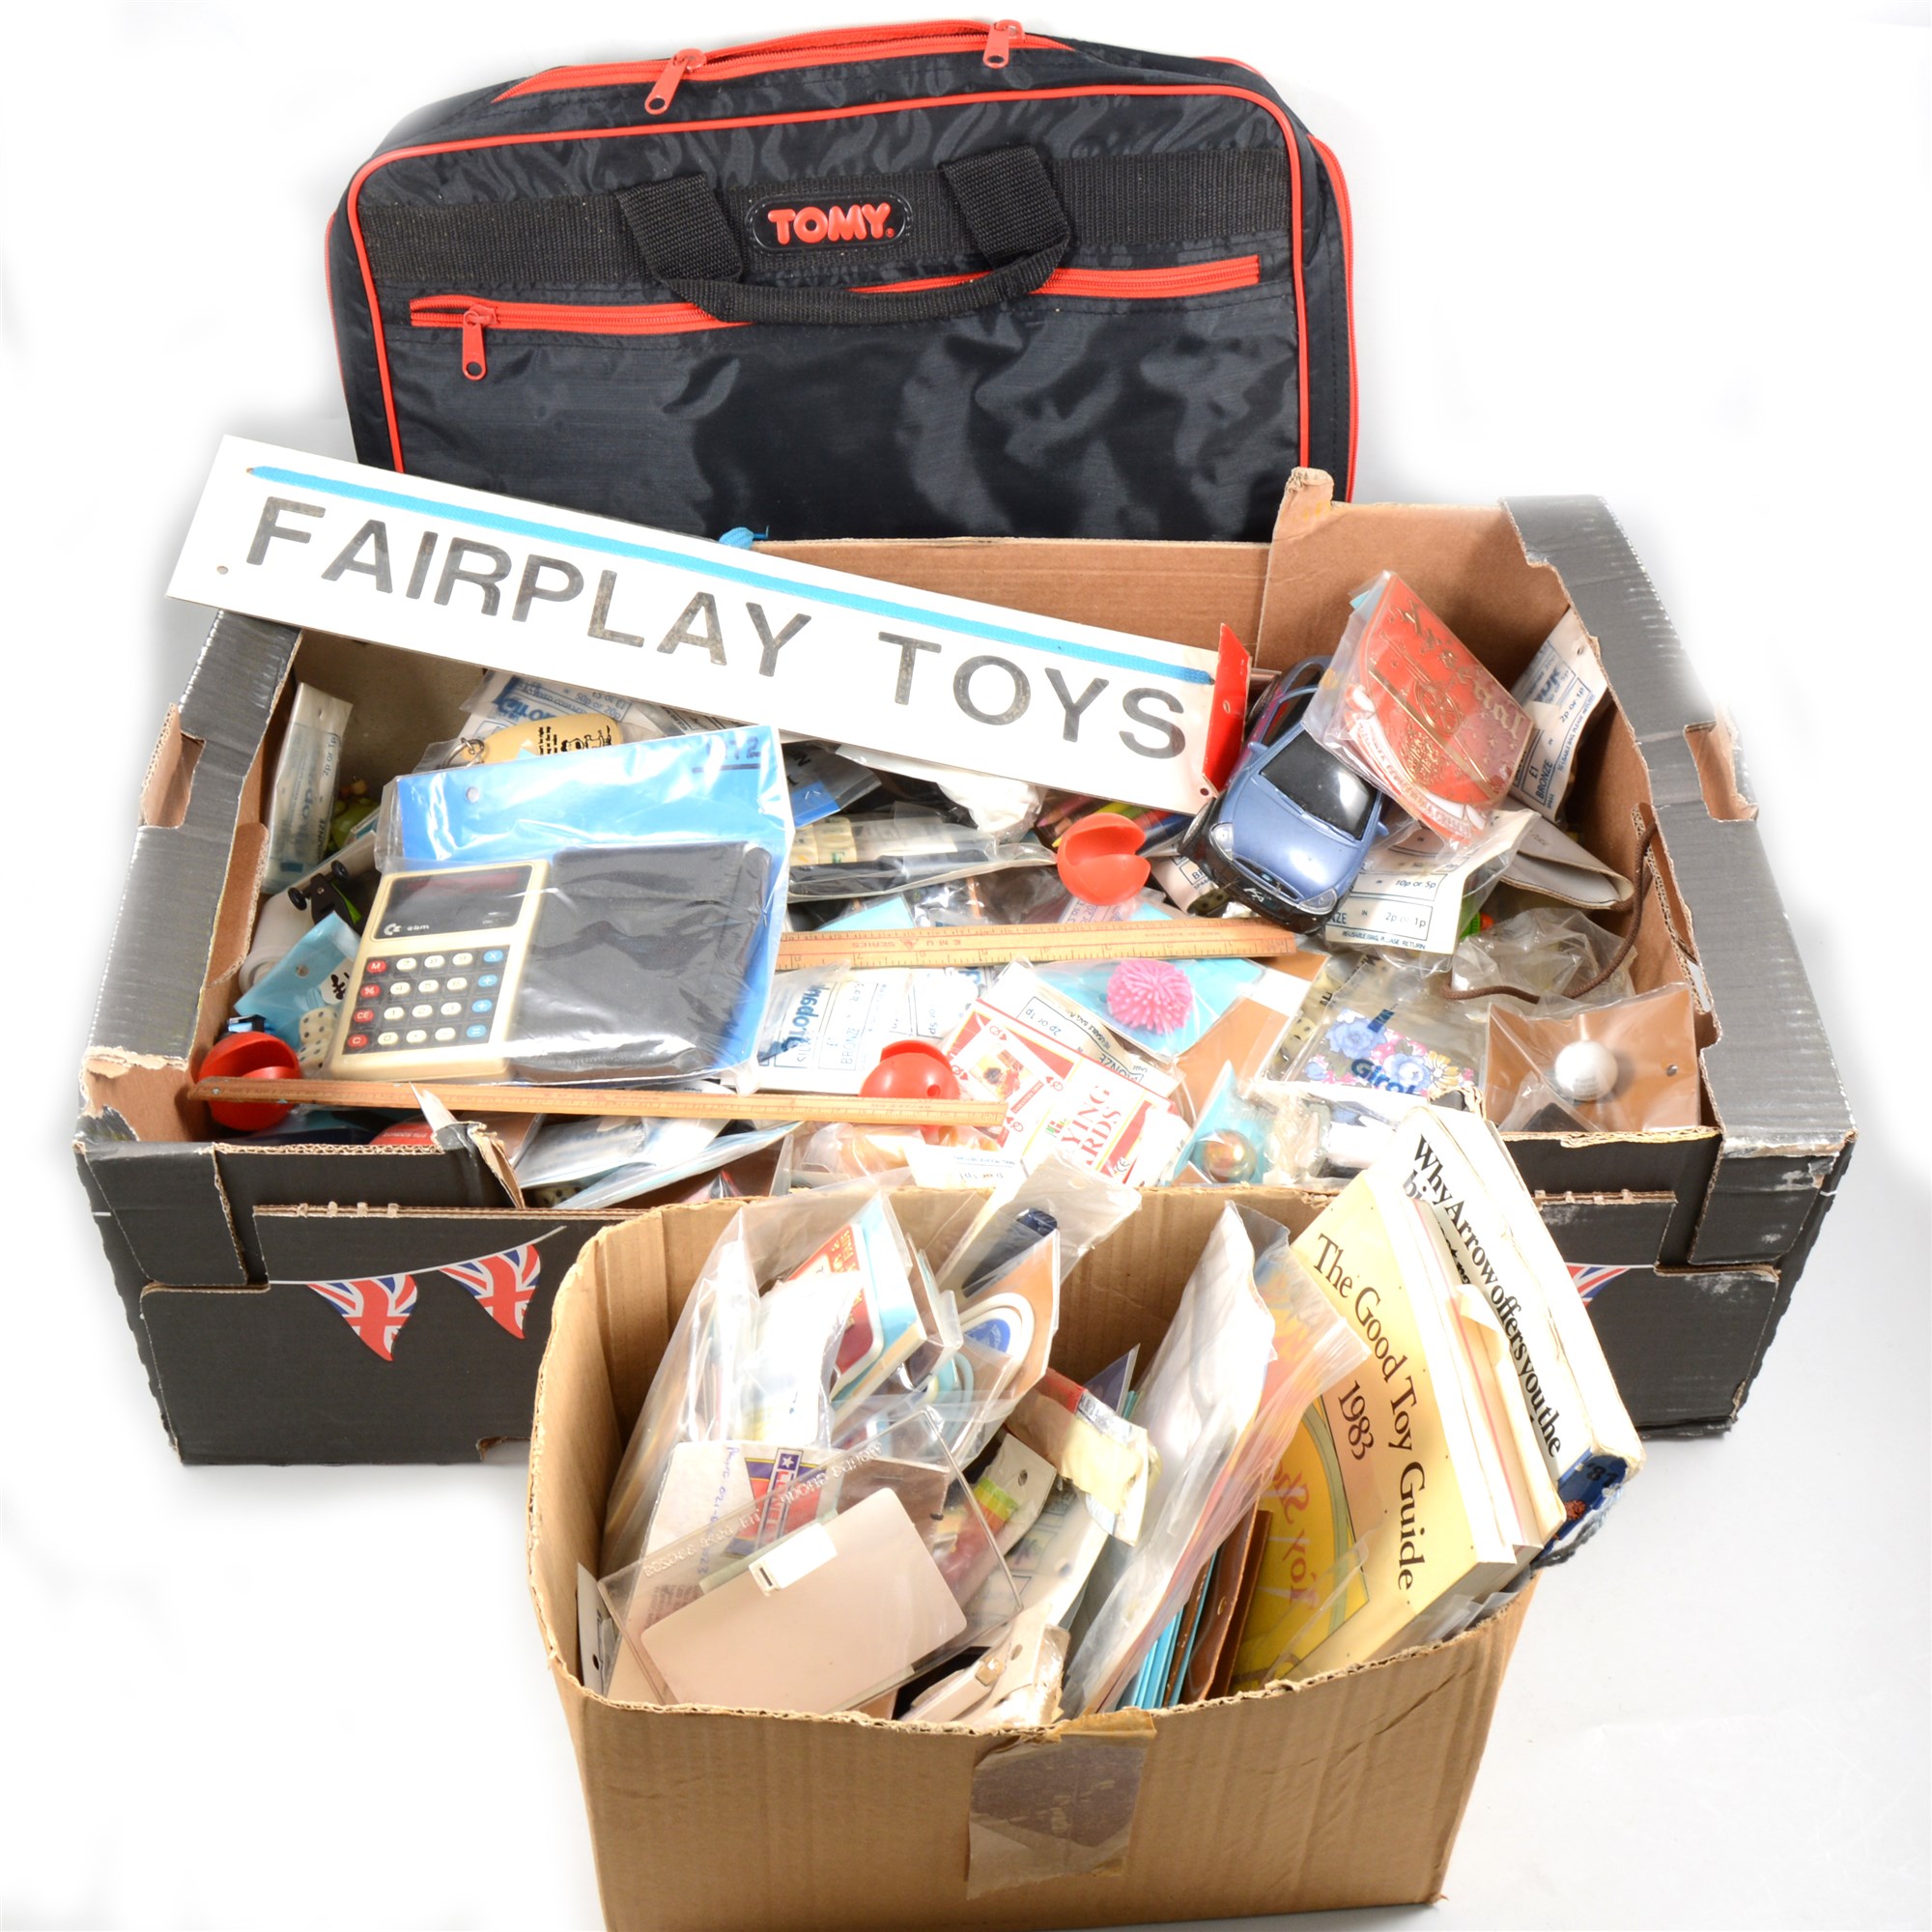 Fairplay Toys, a collection of items belonging to the Leicestershire based Toy Shop